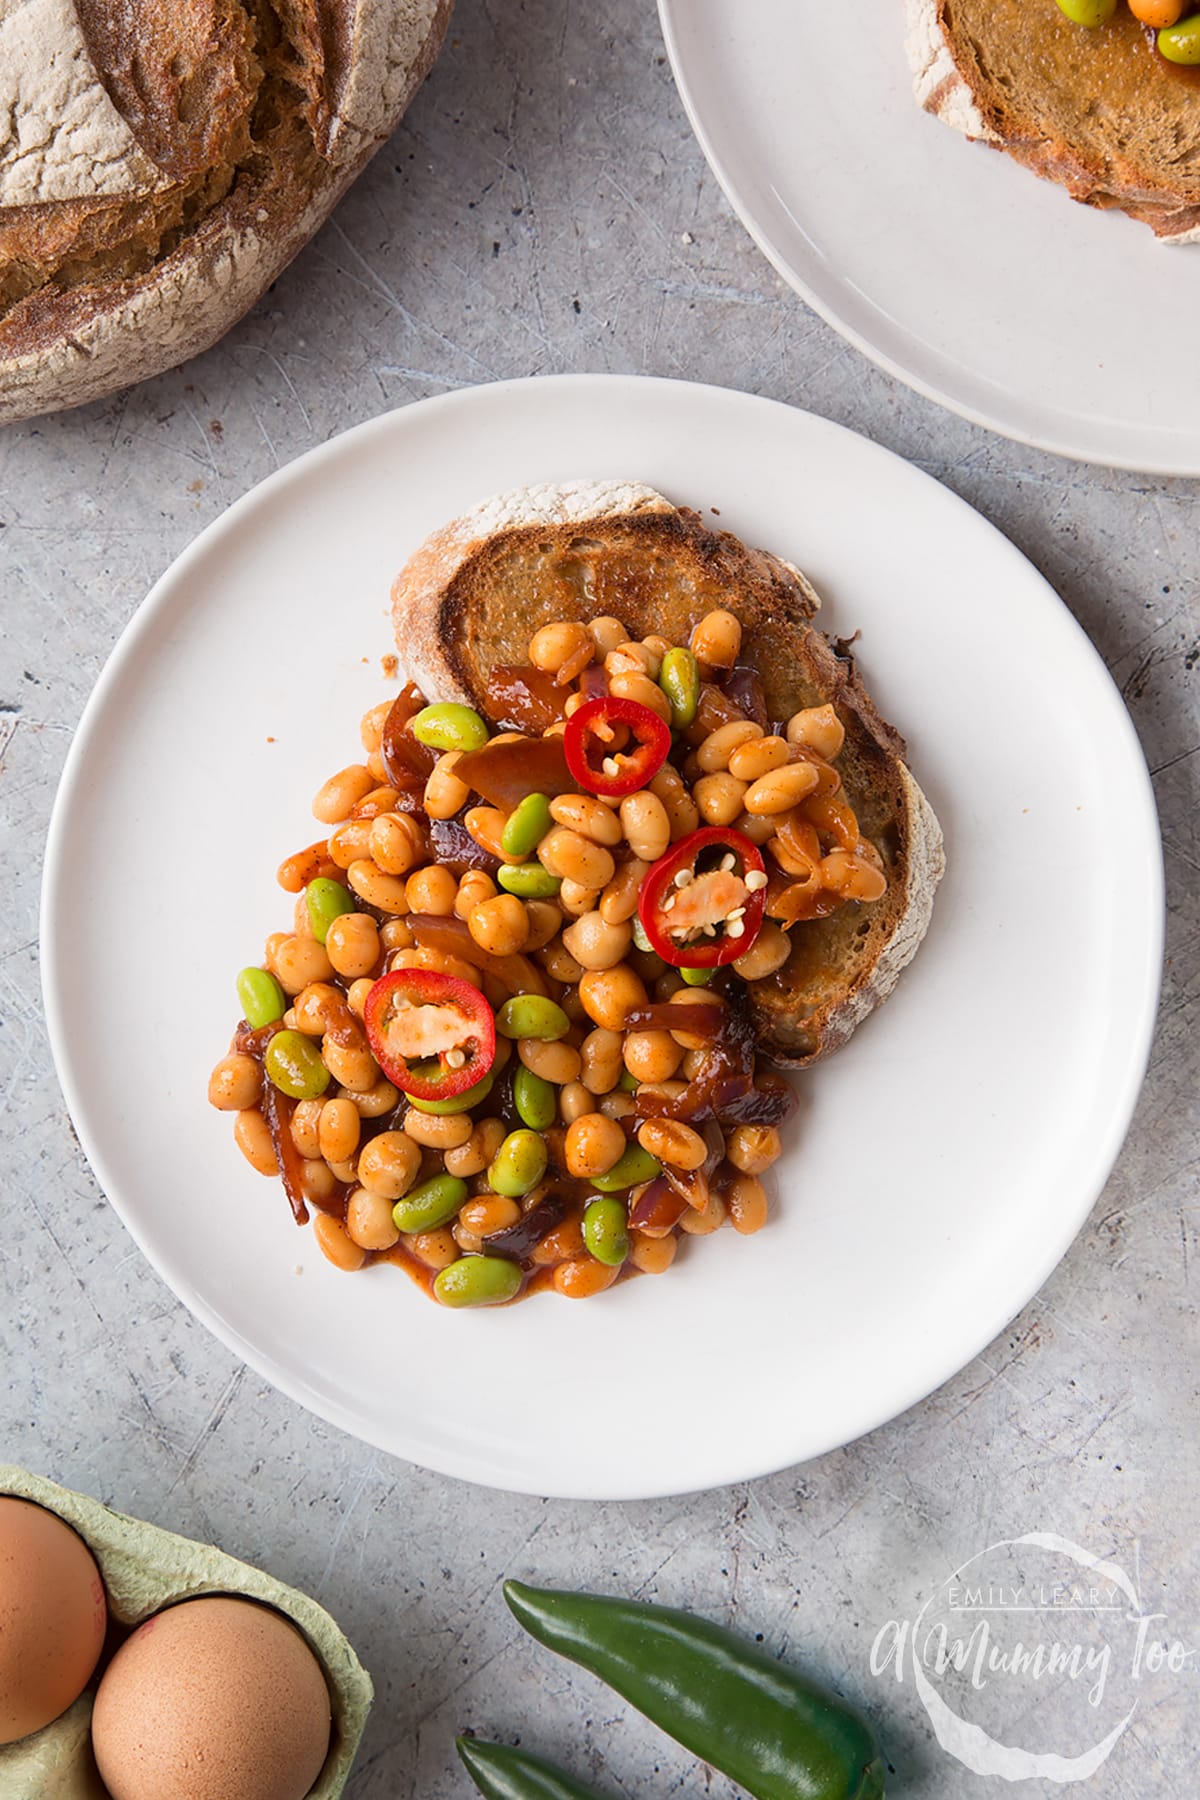 Breakfast beans with chilli, chickpeas and edamame served on sour dough toast. 